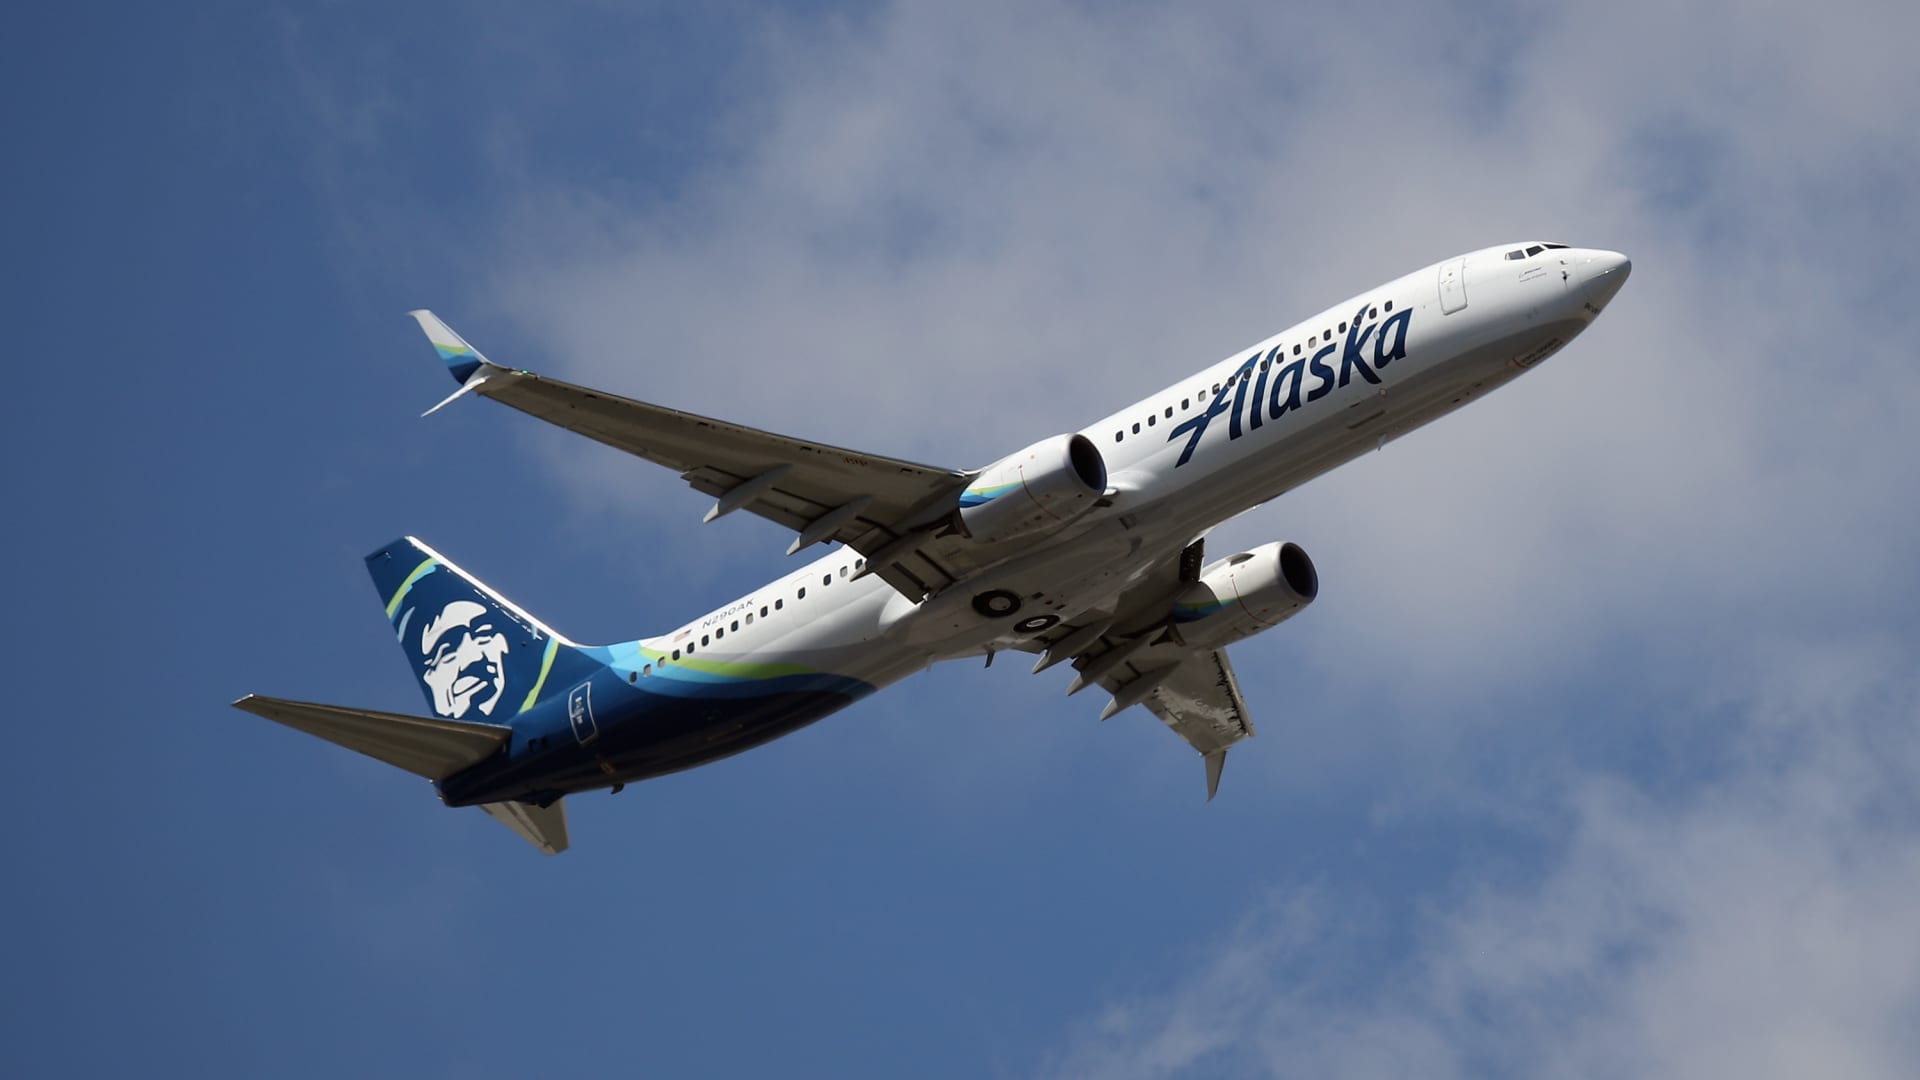 Alaska Airlines flight attendants get double pay to pick up shifts